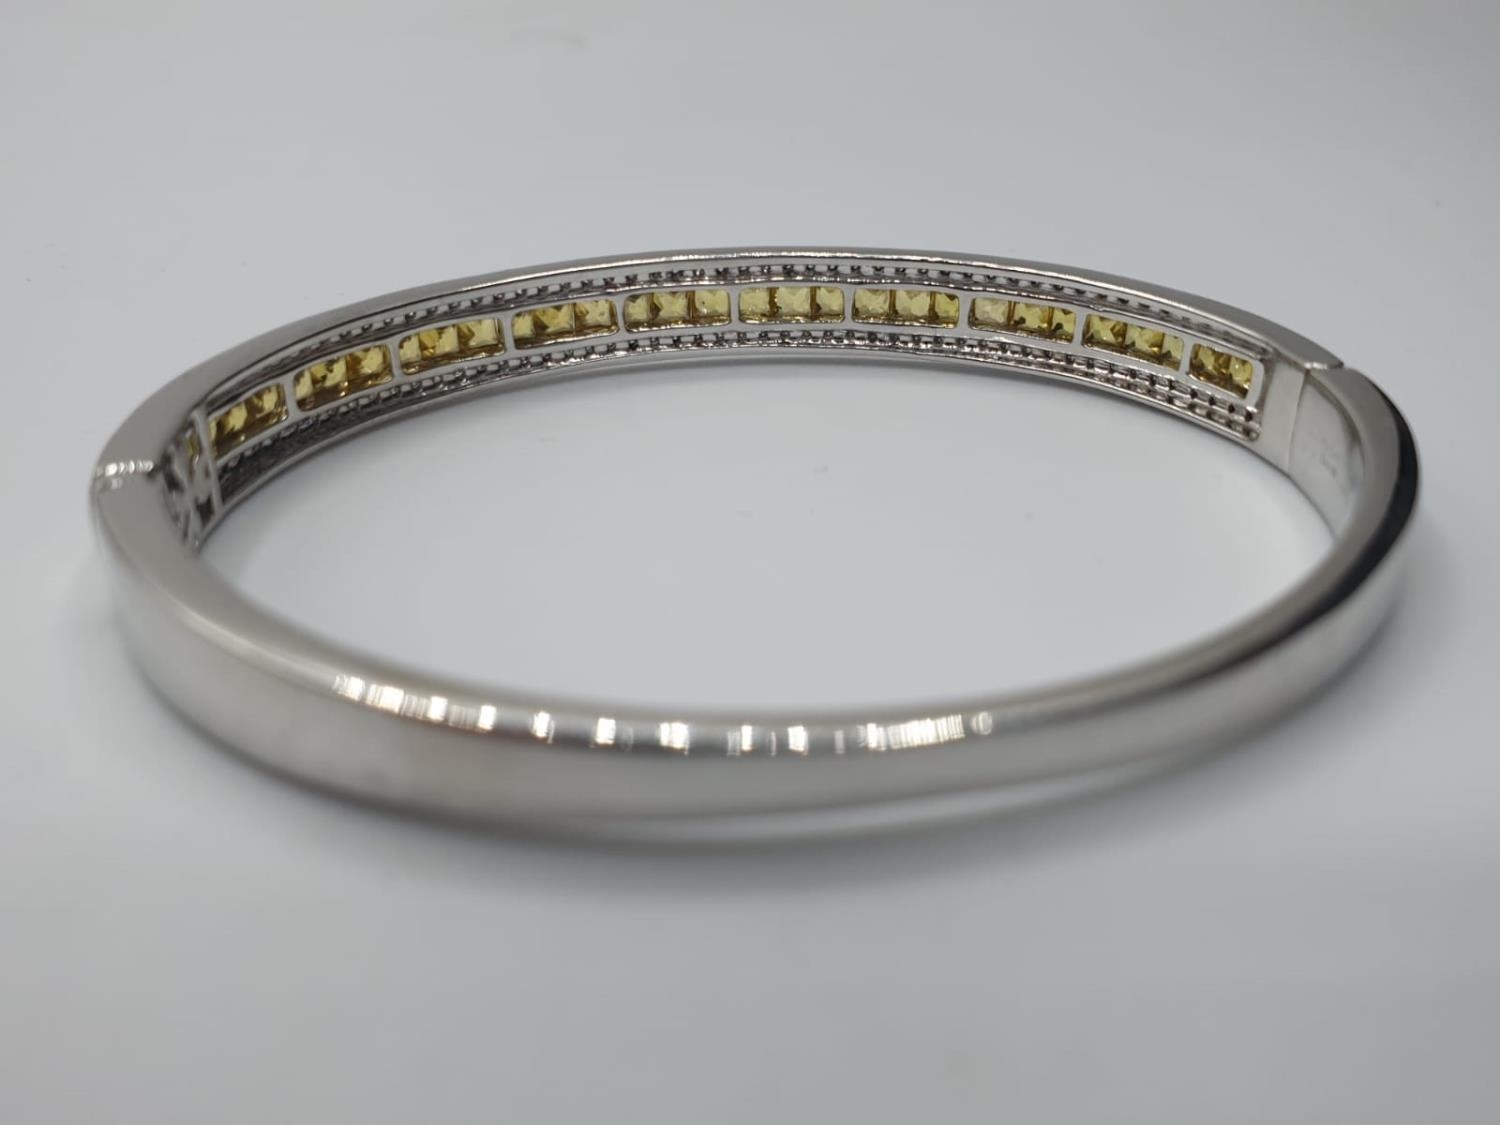 18ct White Gold Hinged Bangle with Channel Set Diamond ( 0.90ct) and Yellow Sapphire Designed by - Image 2 of 5